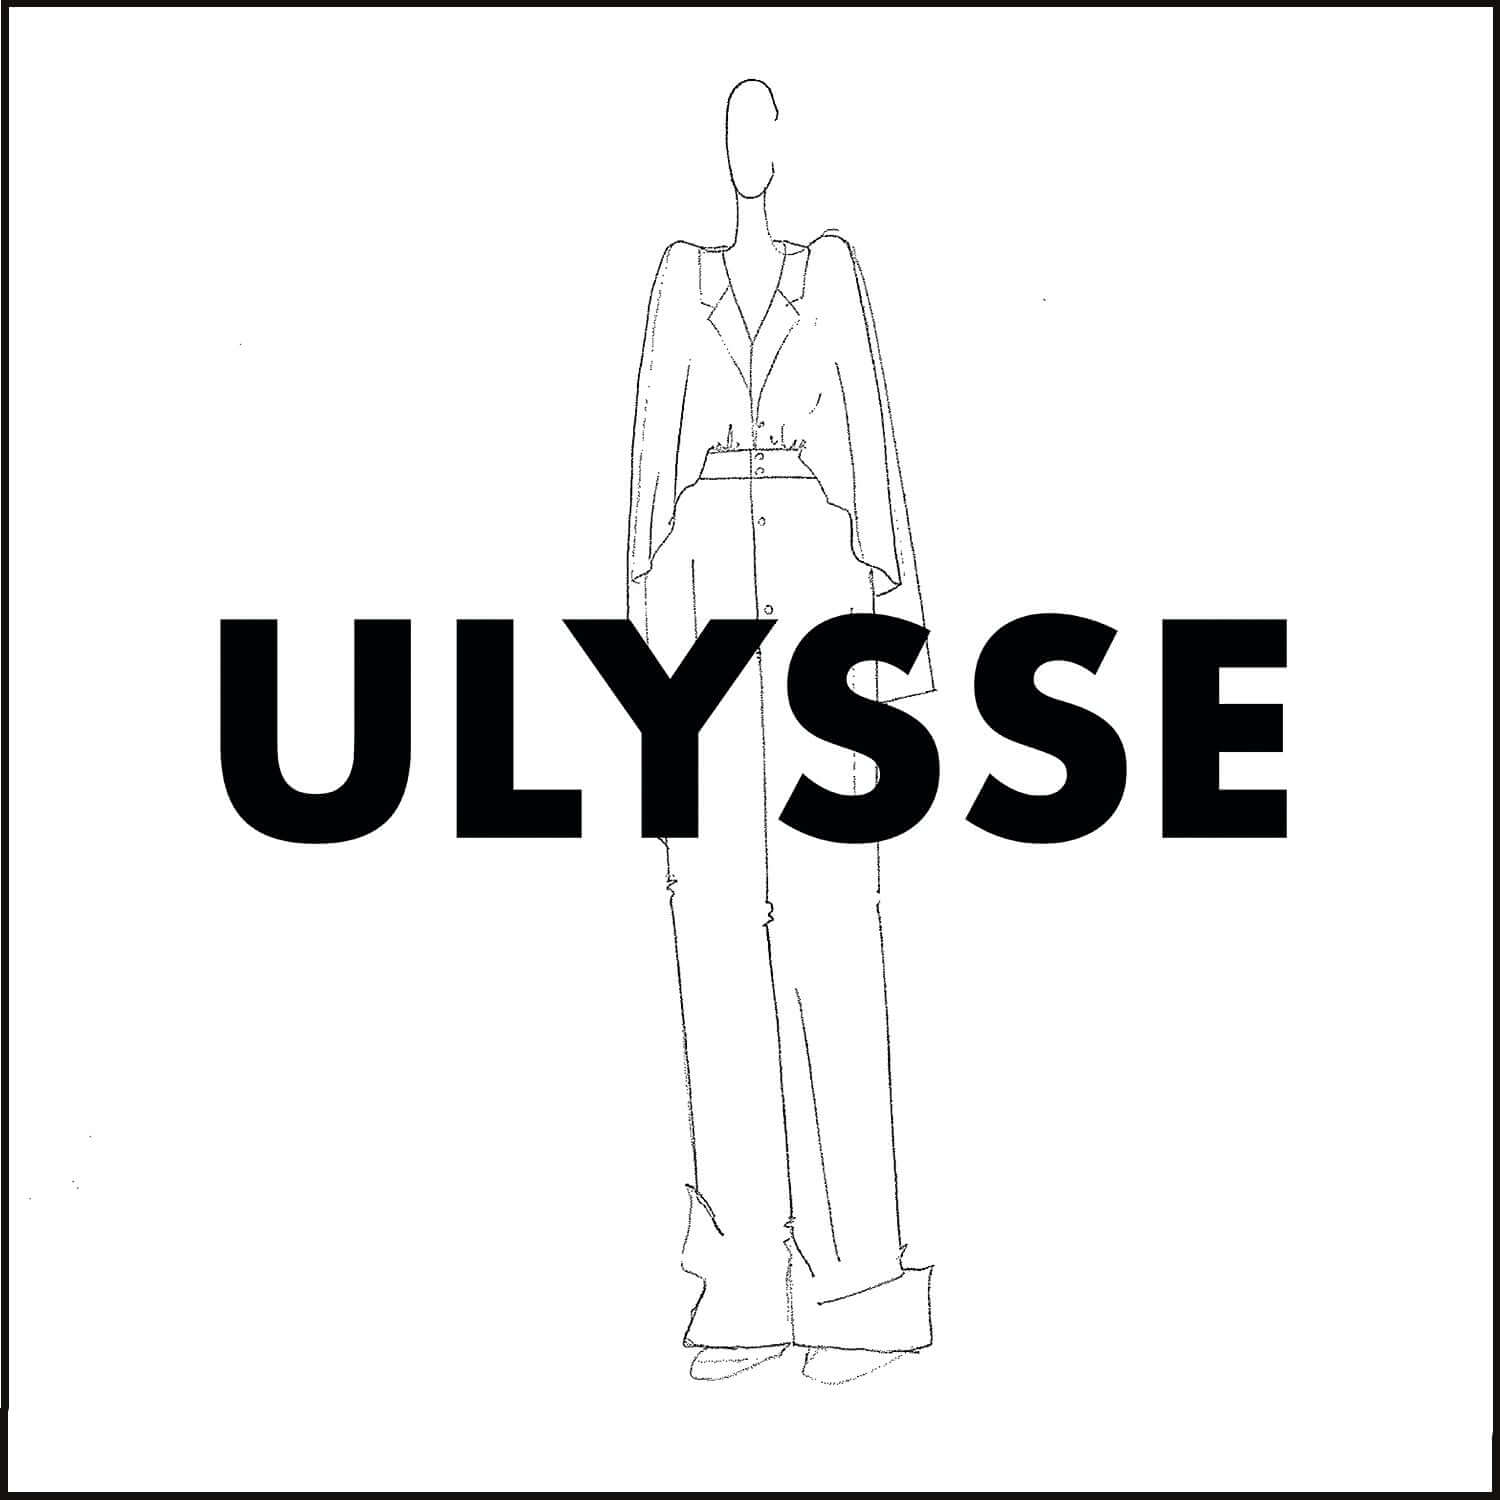 Learn more about... the Ulysse pyjama